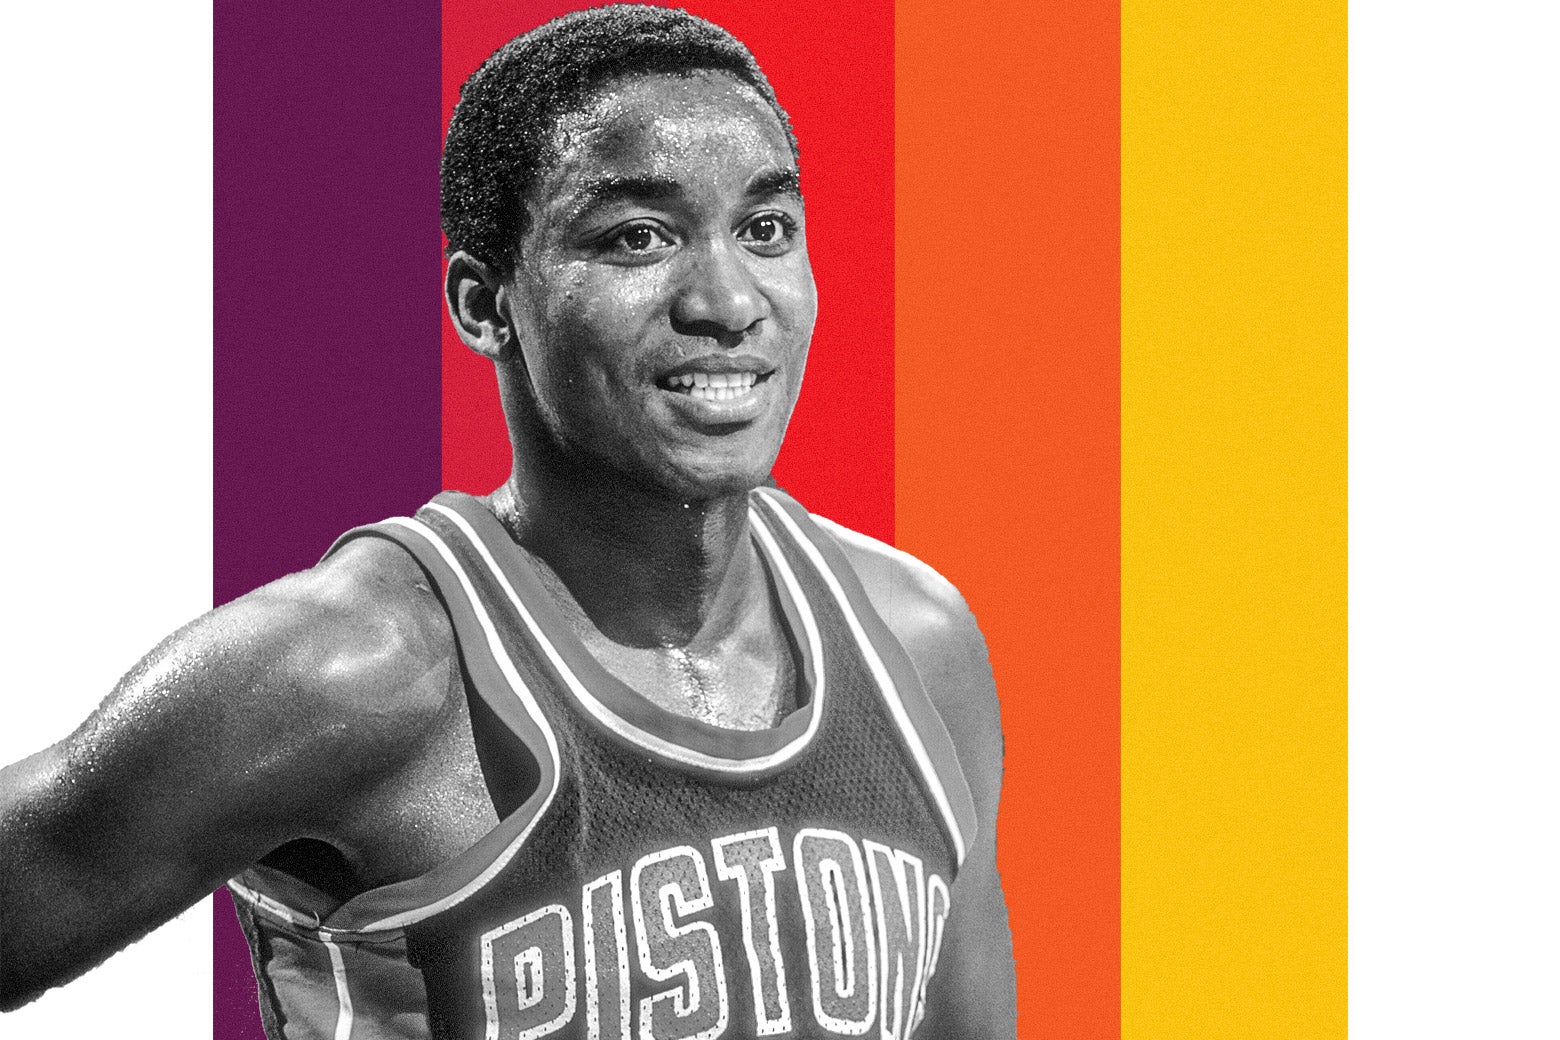 Isiah Thomas in a Pistons jersey against a striped background